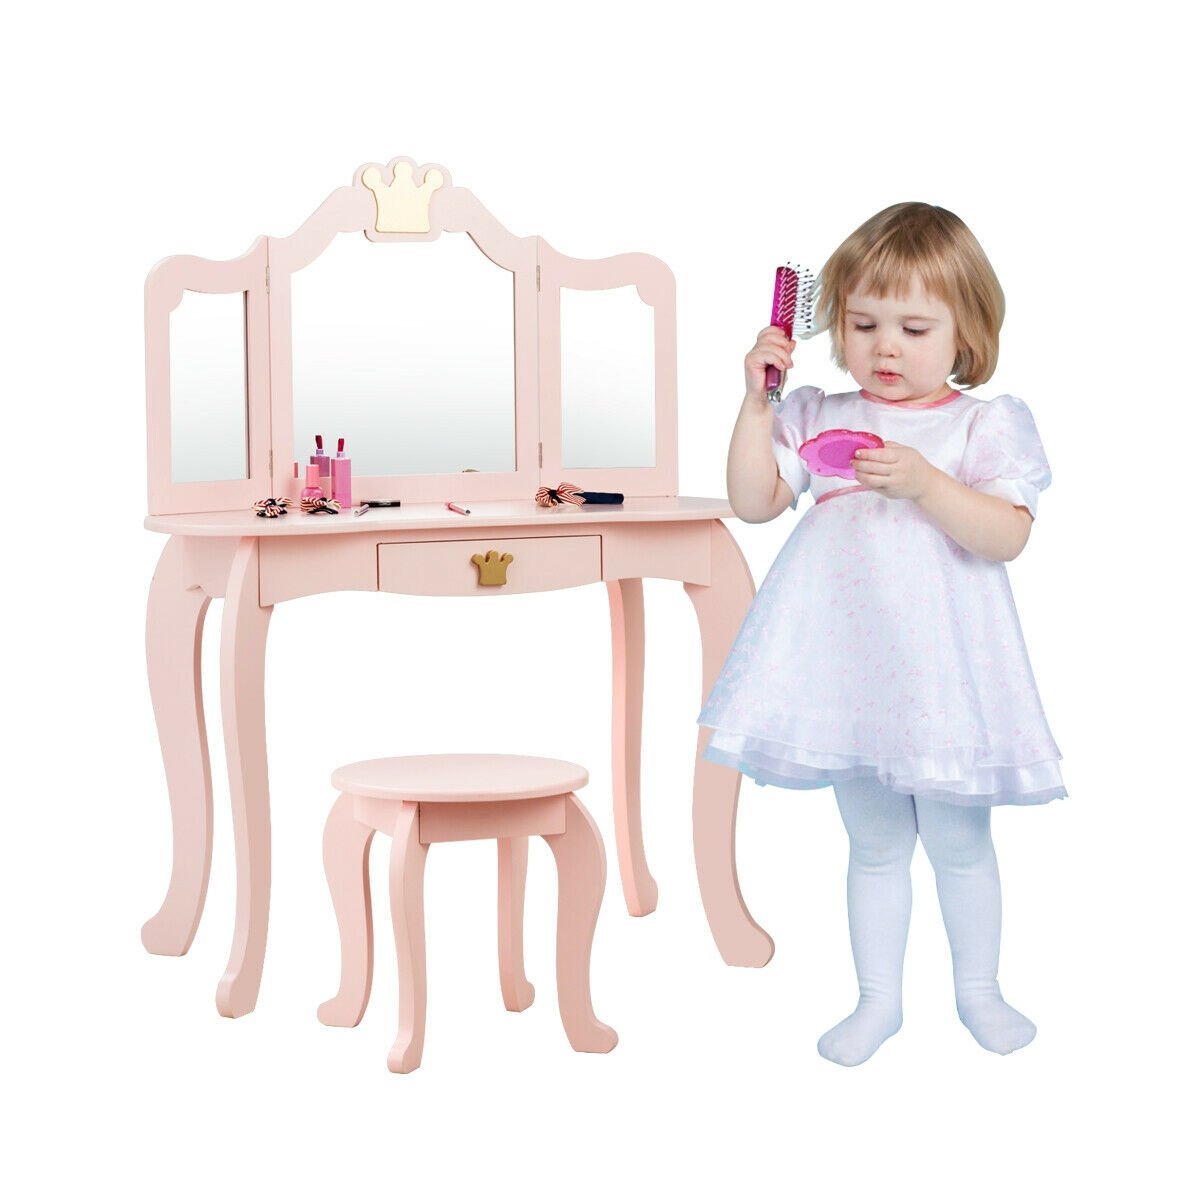 Kids Makeup Dressing Table with Tri-folding Mirror and Stool, Pink